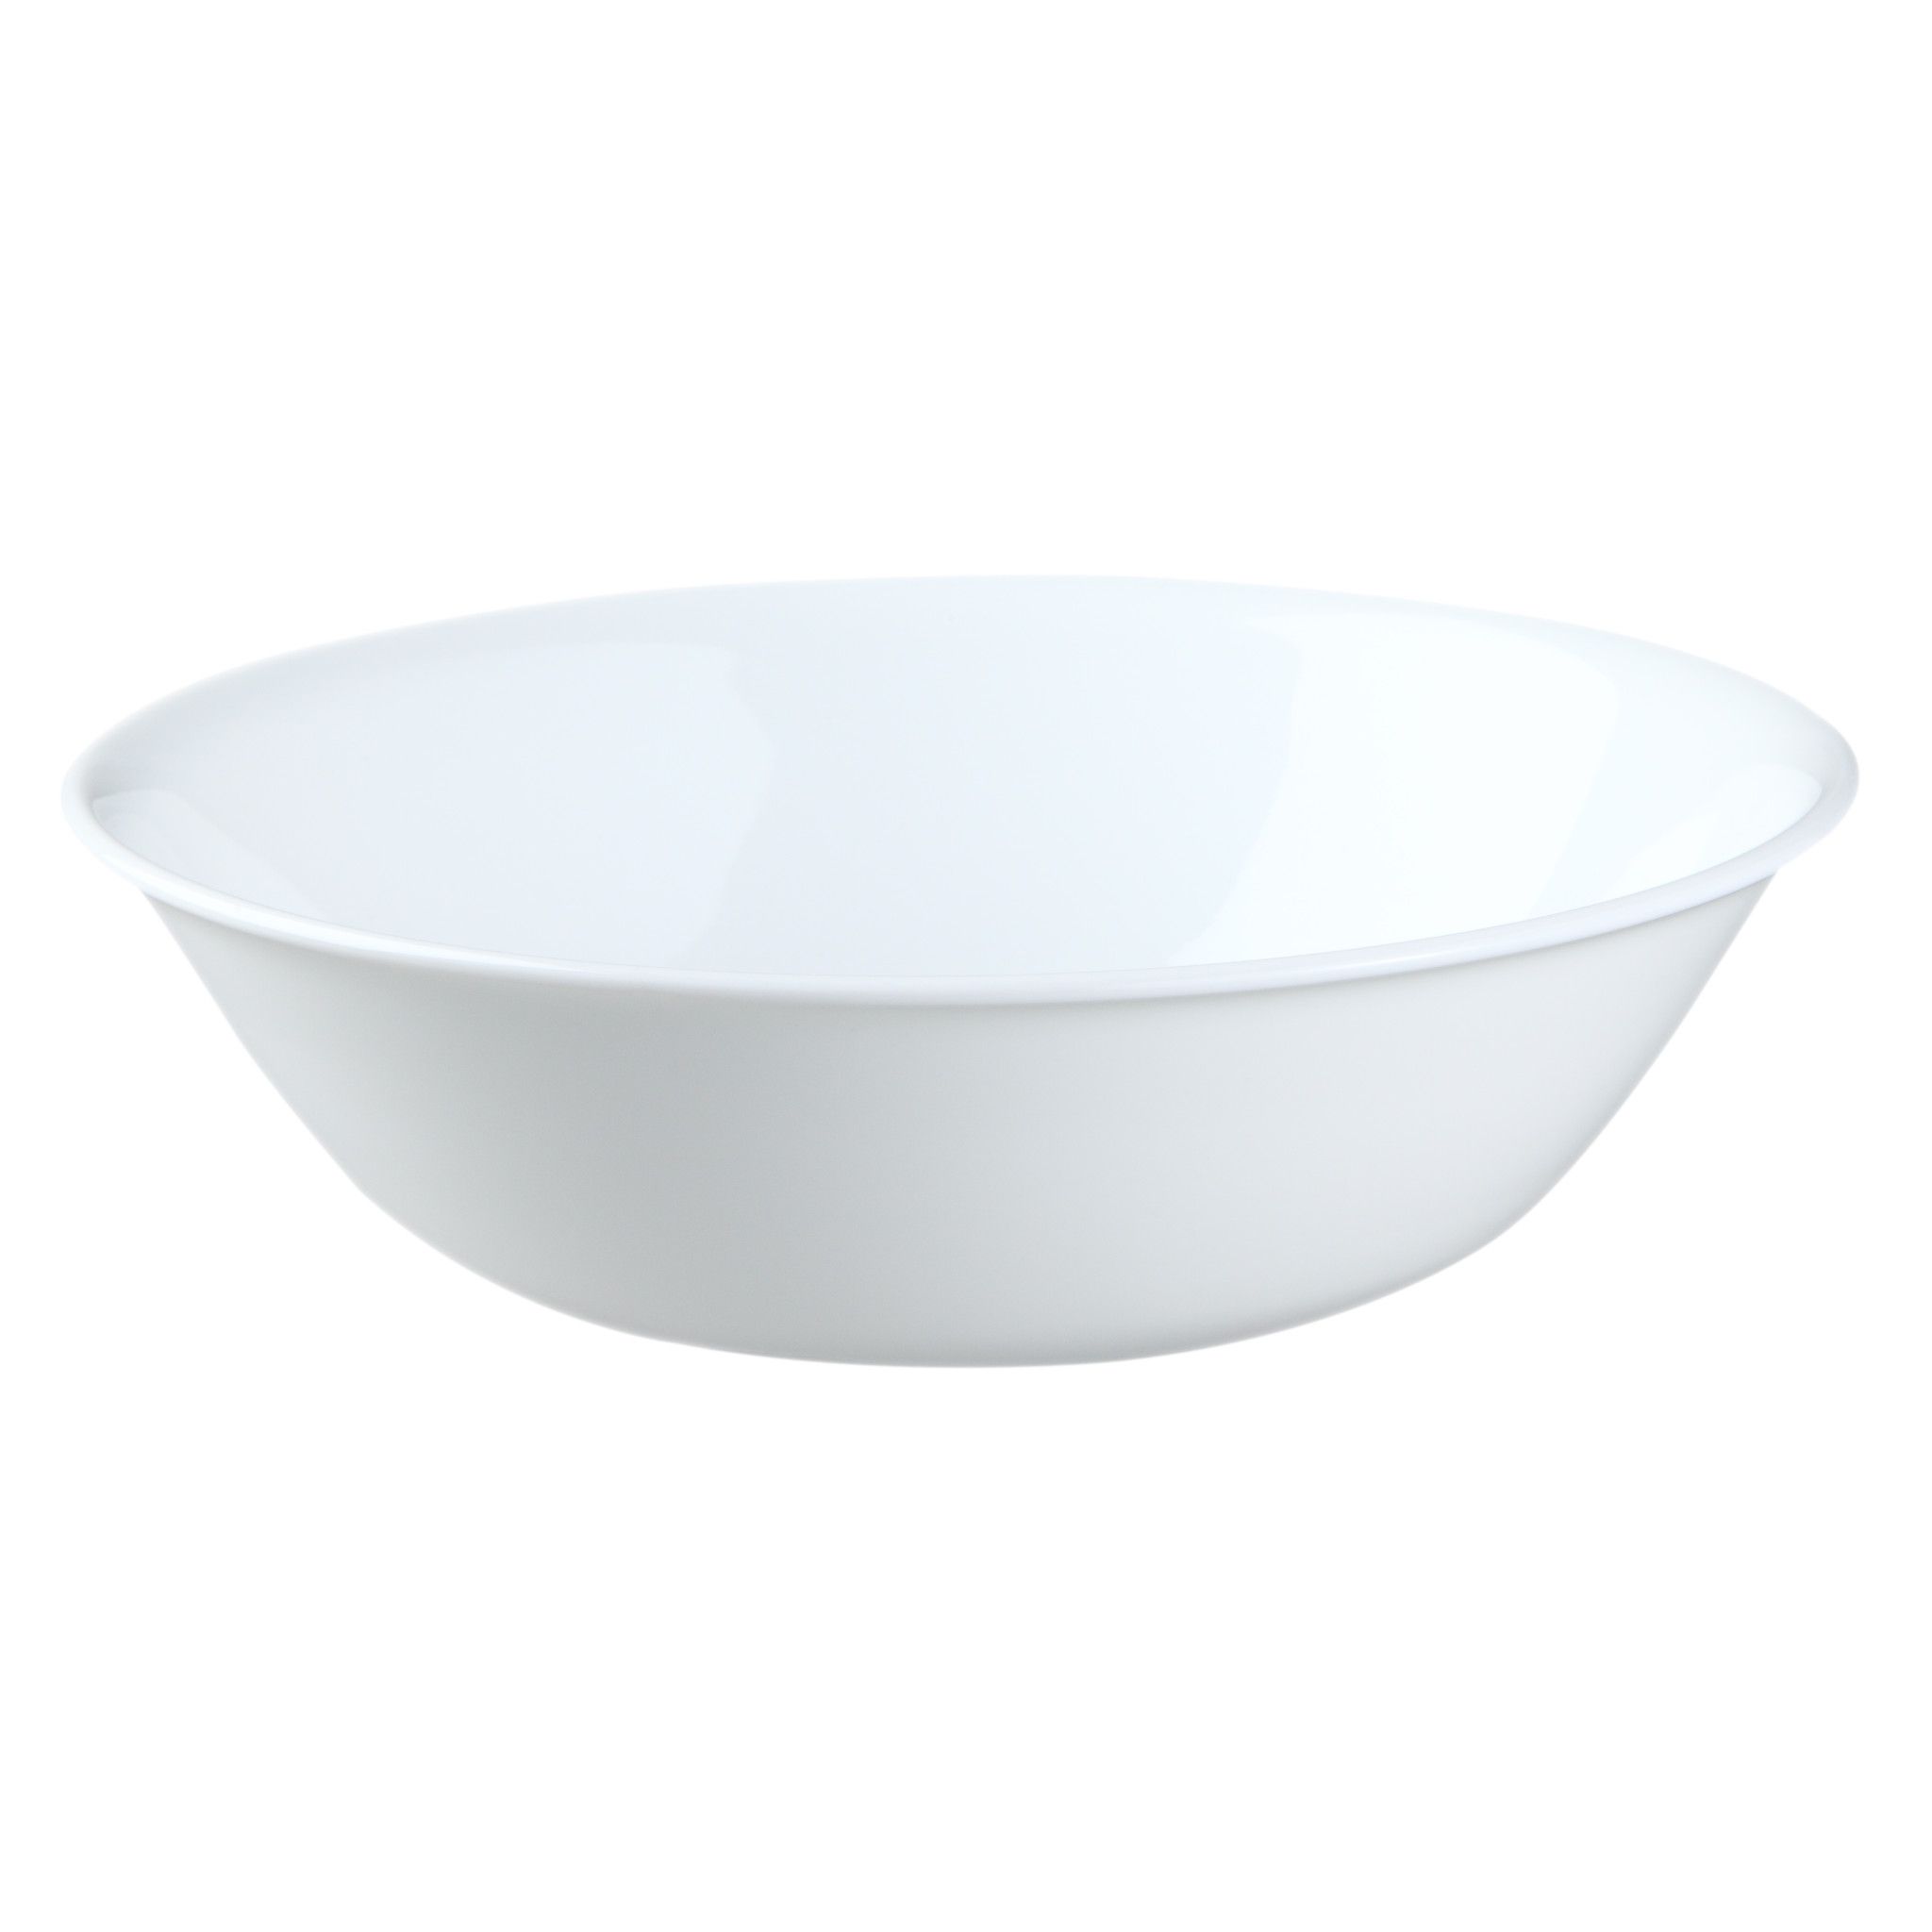 Corelle Winter Frost White, Round Serving Bowl, 1-Quart - image 1 of 6